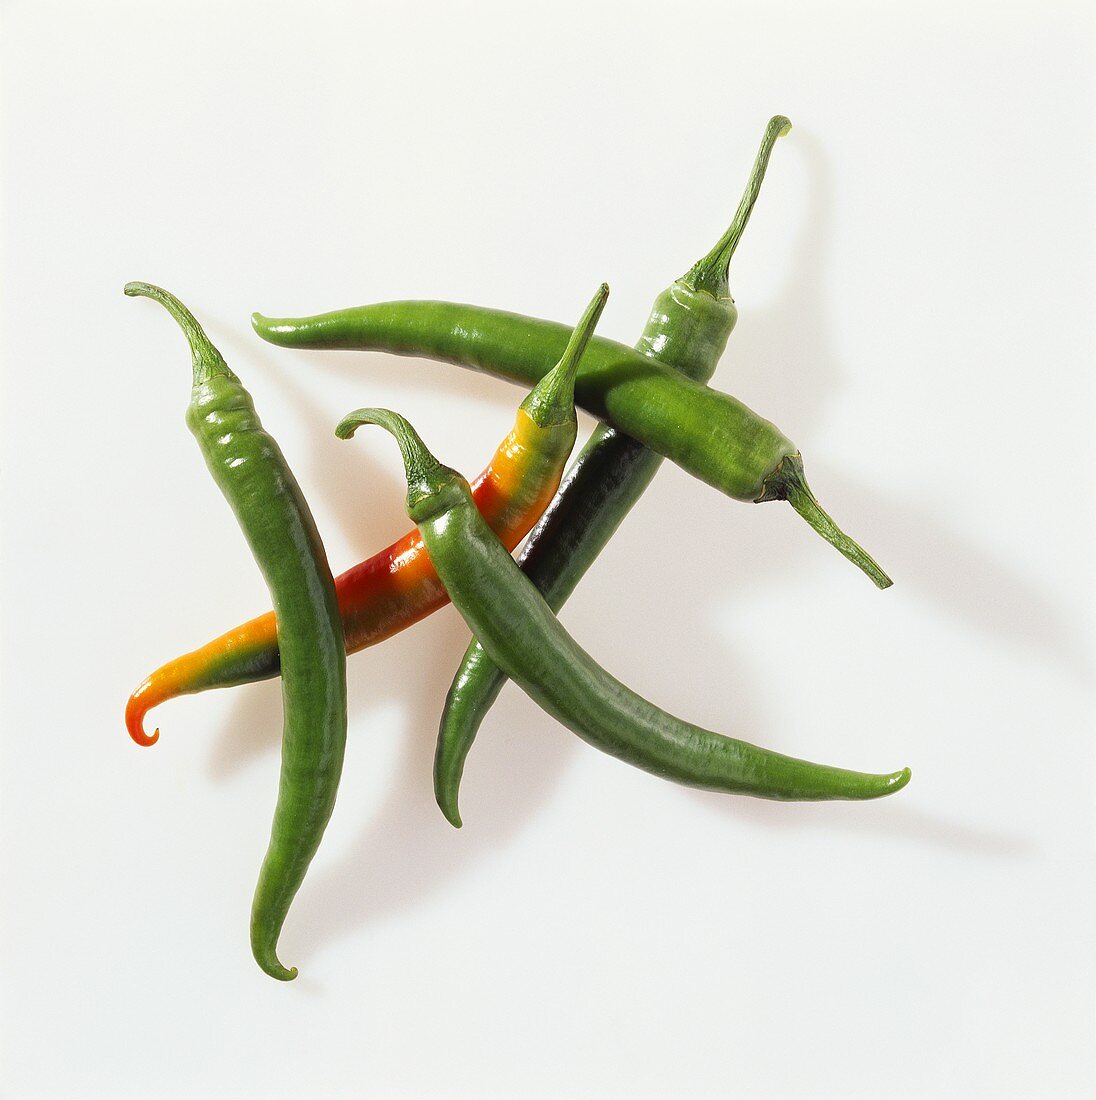 Several green chili peppers